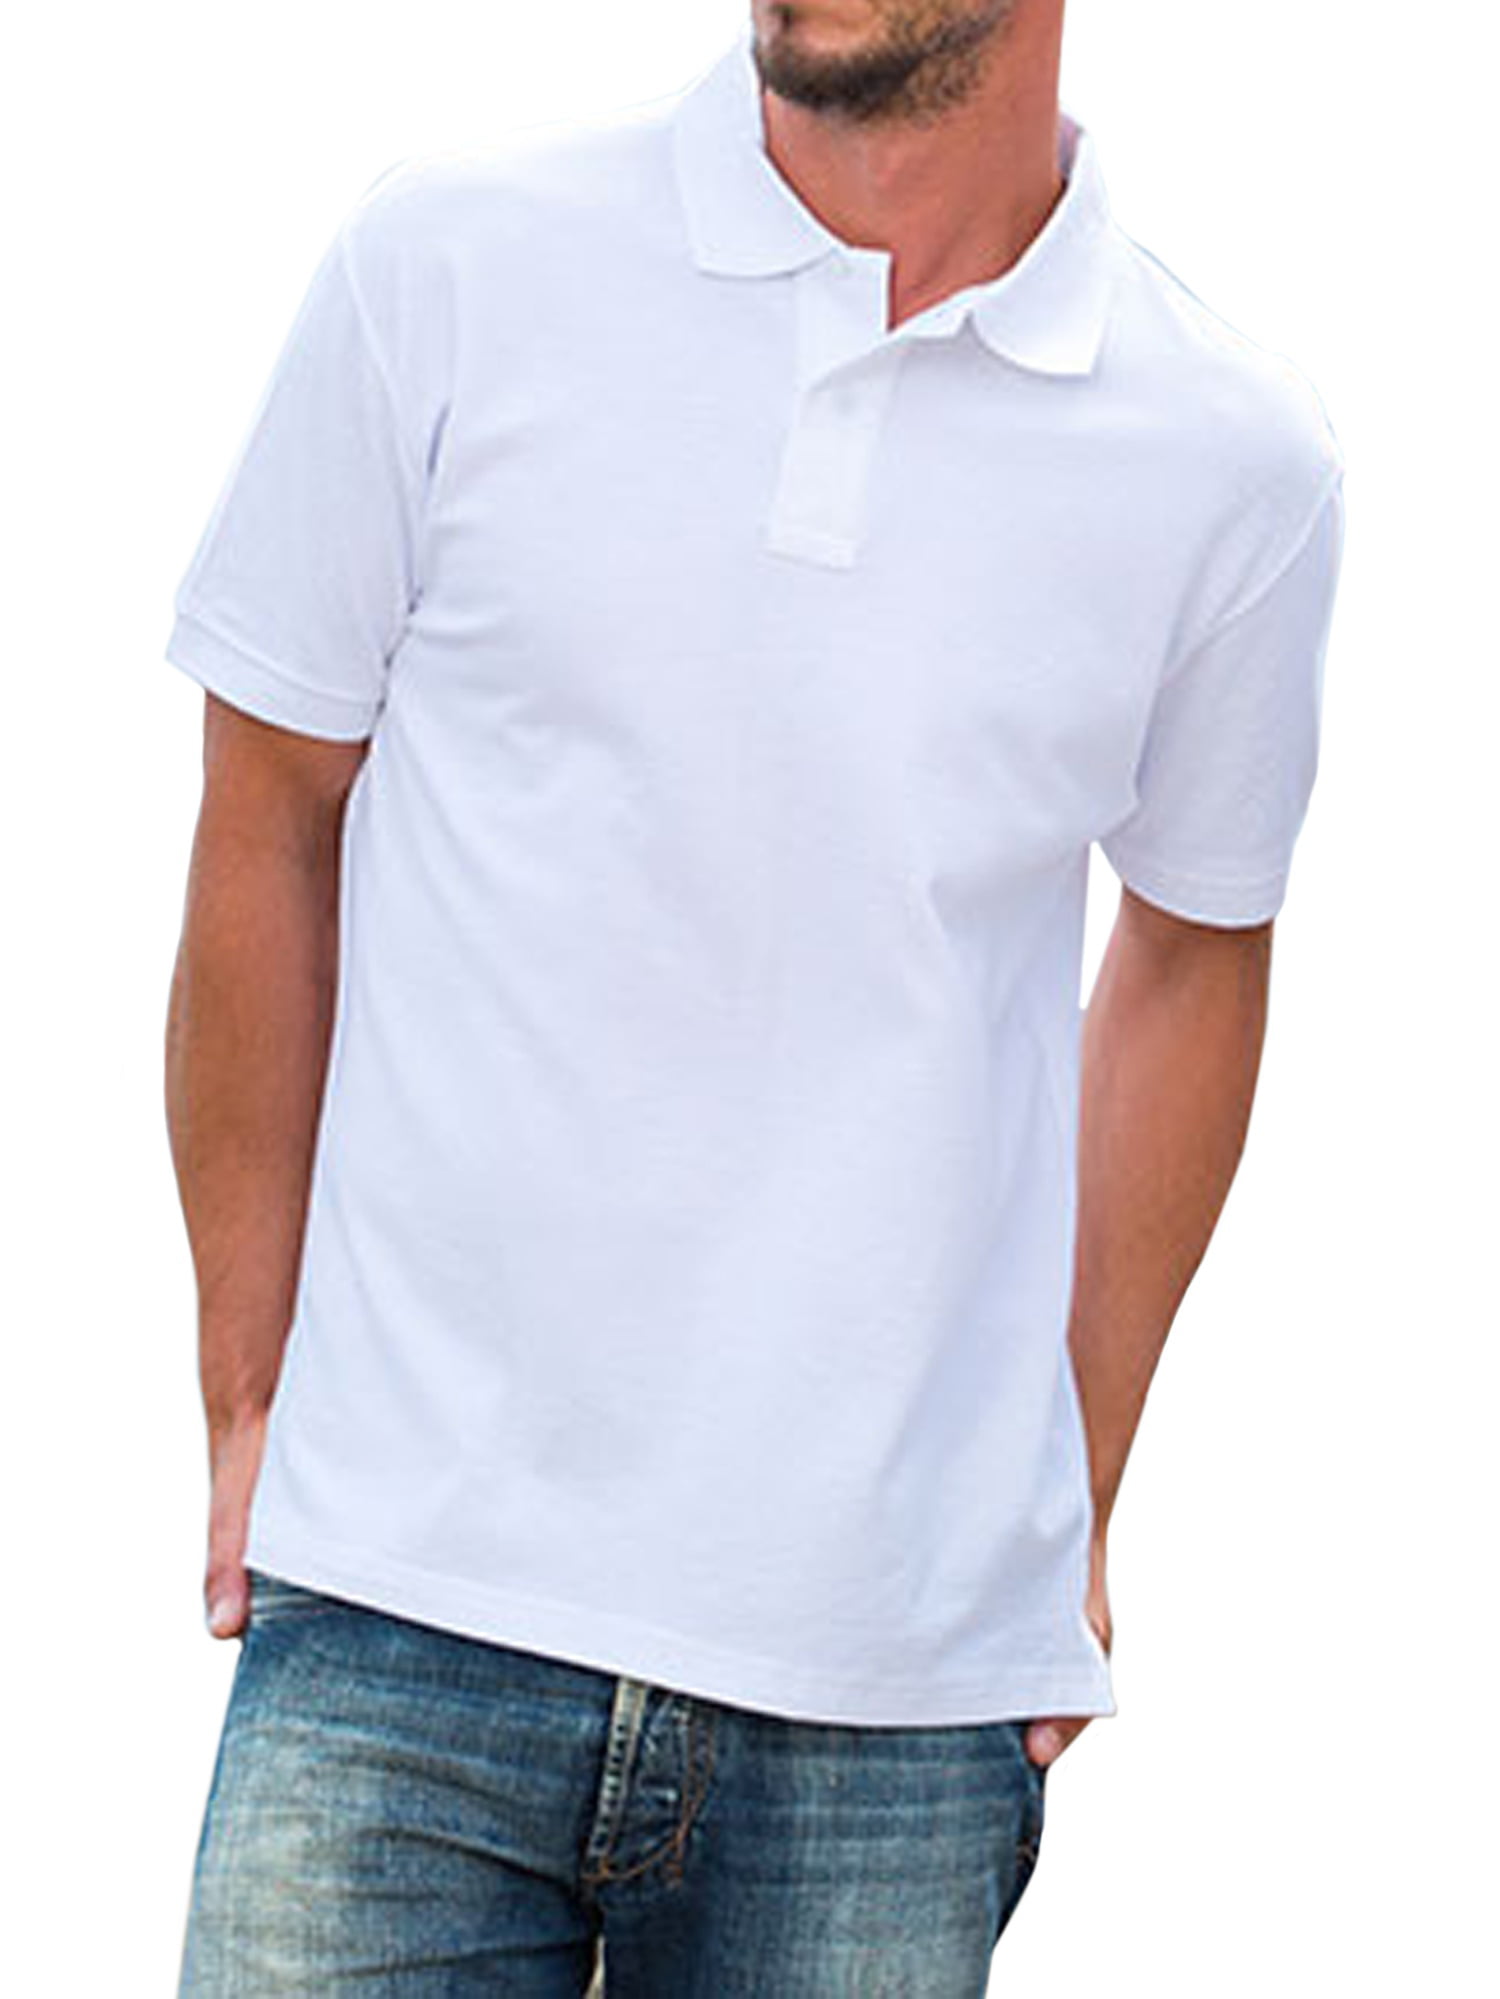 Polo shirt For Men Short Sleeve 100% Cotton Stock Clearance Sale.. 